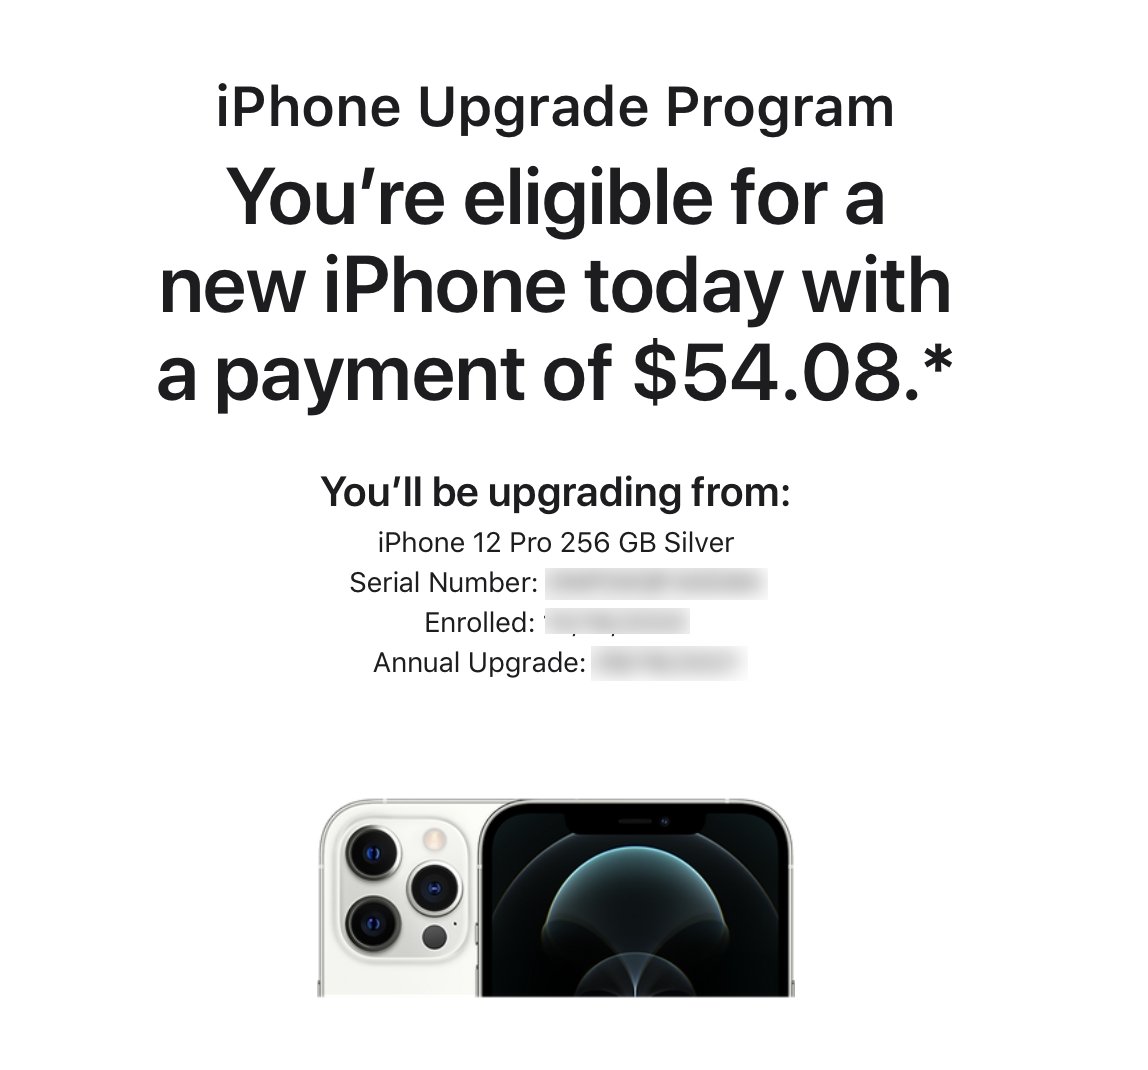 Qualifying iPhone Upgrade Program members can get the new phone by paying their last instalment early